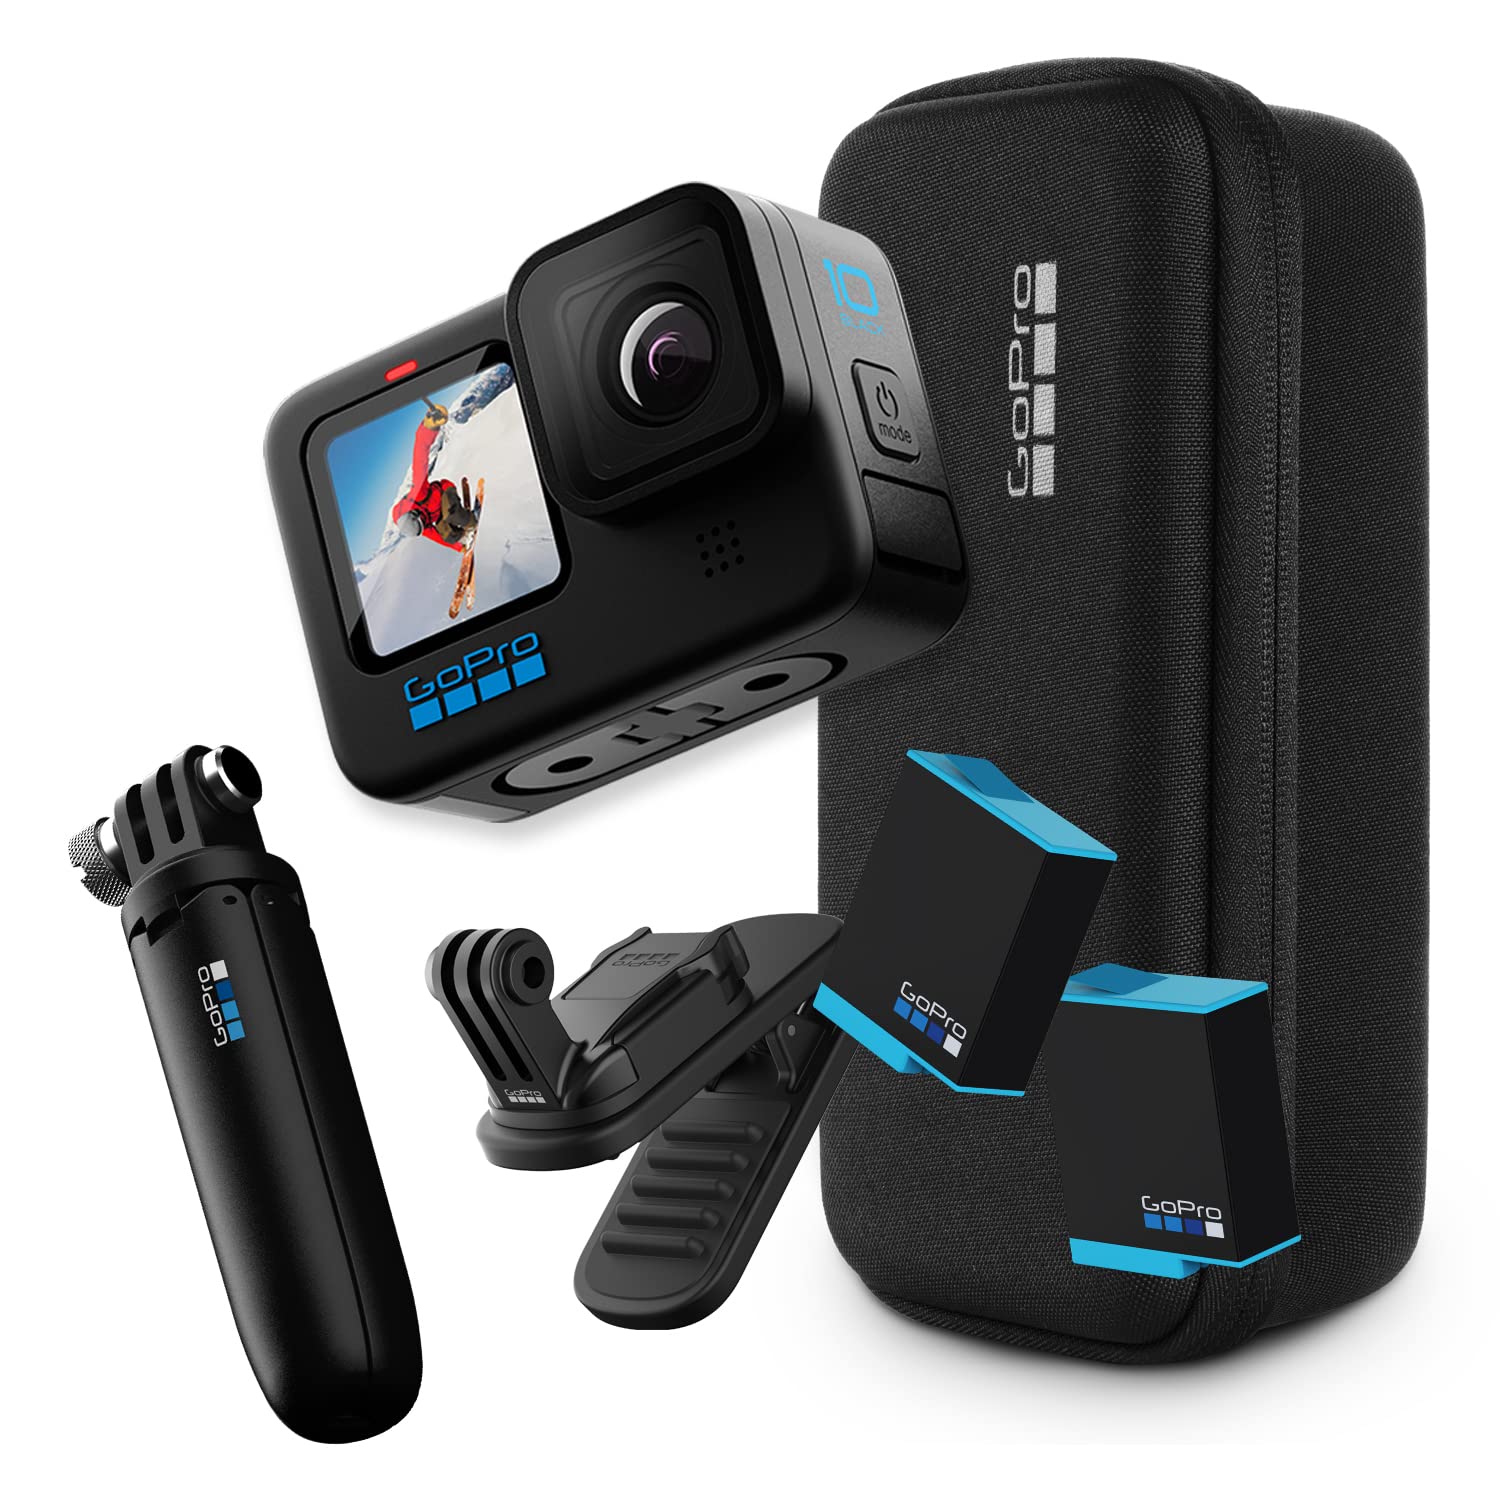 GoPro HERO10 Black Accessory Bundle - Includes HERO10 Camera, Shorty (Mini Extension Pole Grip), Magnetic Swivel Clip, Rechargeable Total), and Case HERO10 + Accessory Bundle